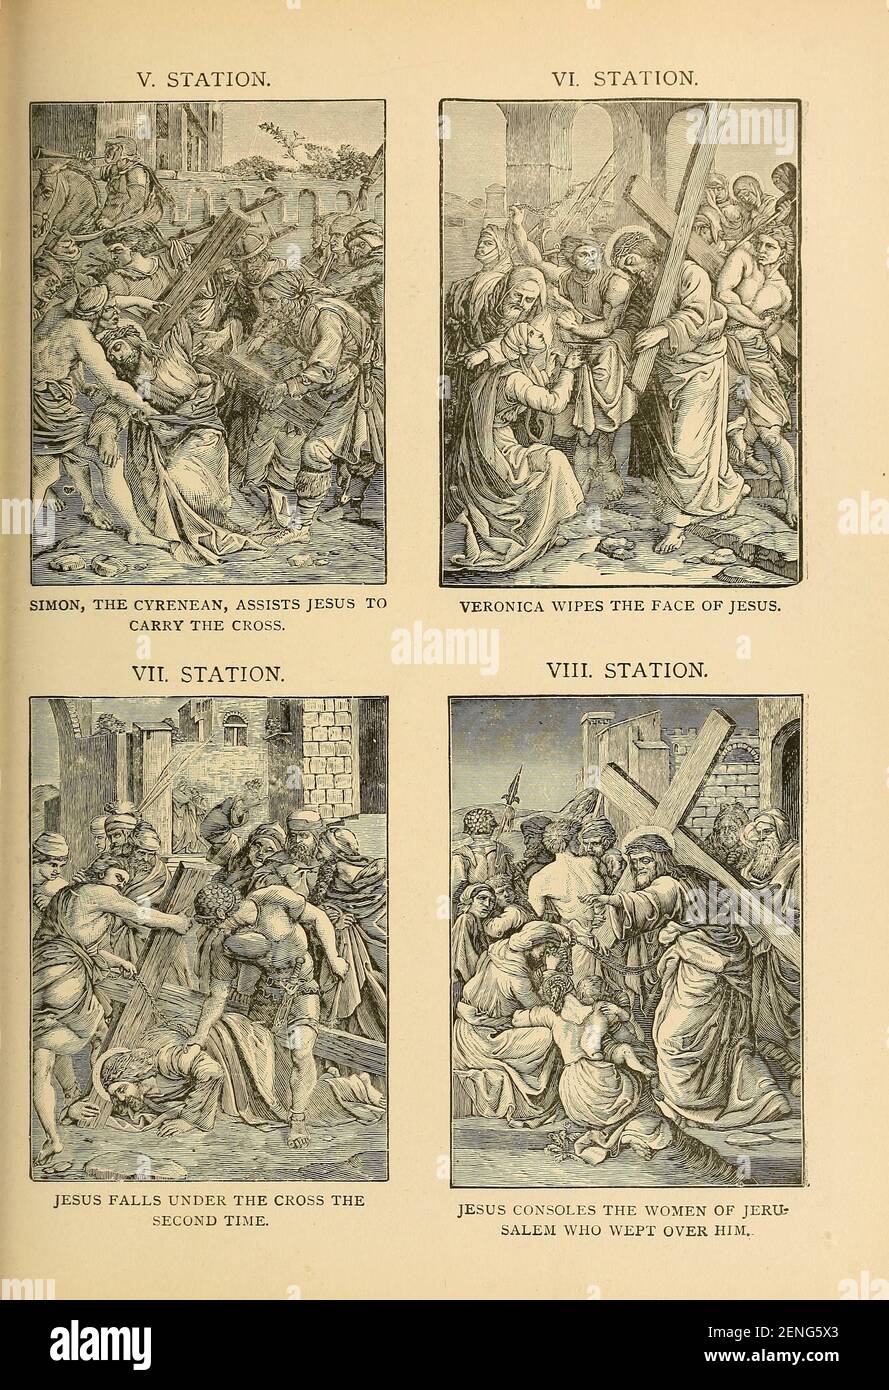 Stations of the Cross From ' The pictorial Catholic library ' containing seven volumes in one: History of the Blessed Virgin -- The dove of the tabernacle -- Catholic history -- Apparition of the Blessed Virgin -- A chronological index -- Pastoral letters of the Third Plenary. Council -- A chaplet of verses -- Catholic hymns  Published in New York by Murphy & McCarthy in 1887 Stock Photo